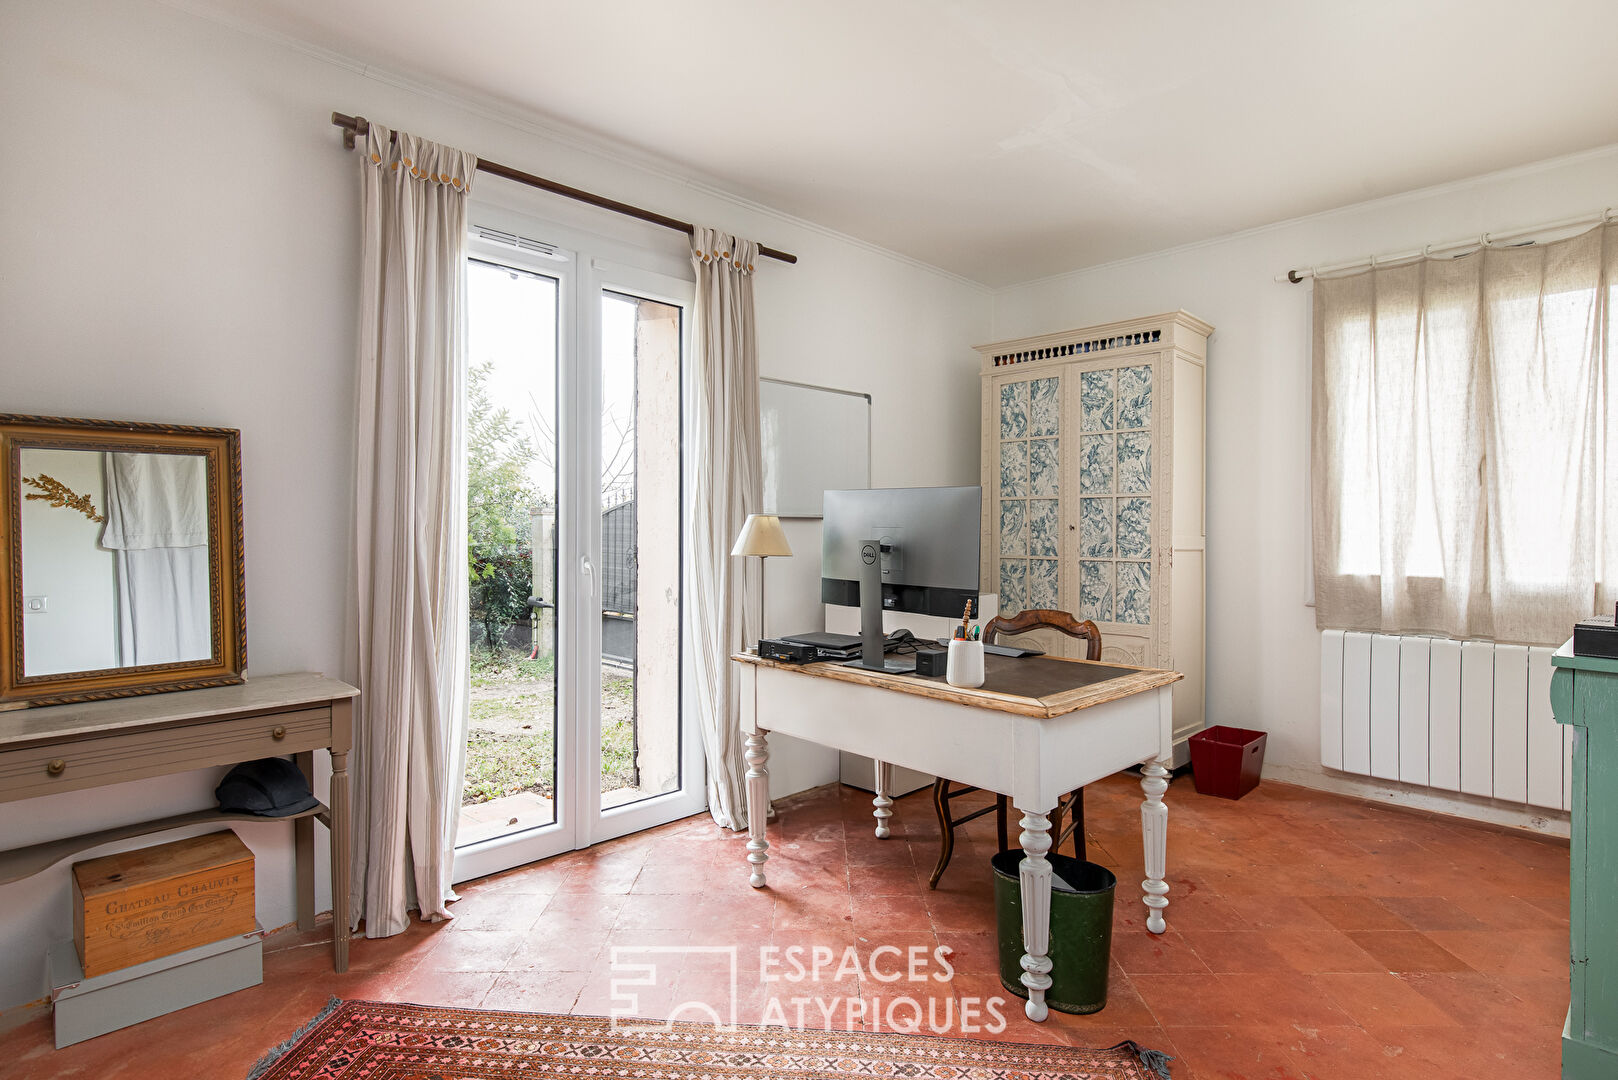 Tastefully renovated farmhouse a few minutes from the city center